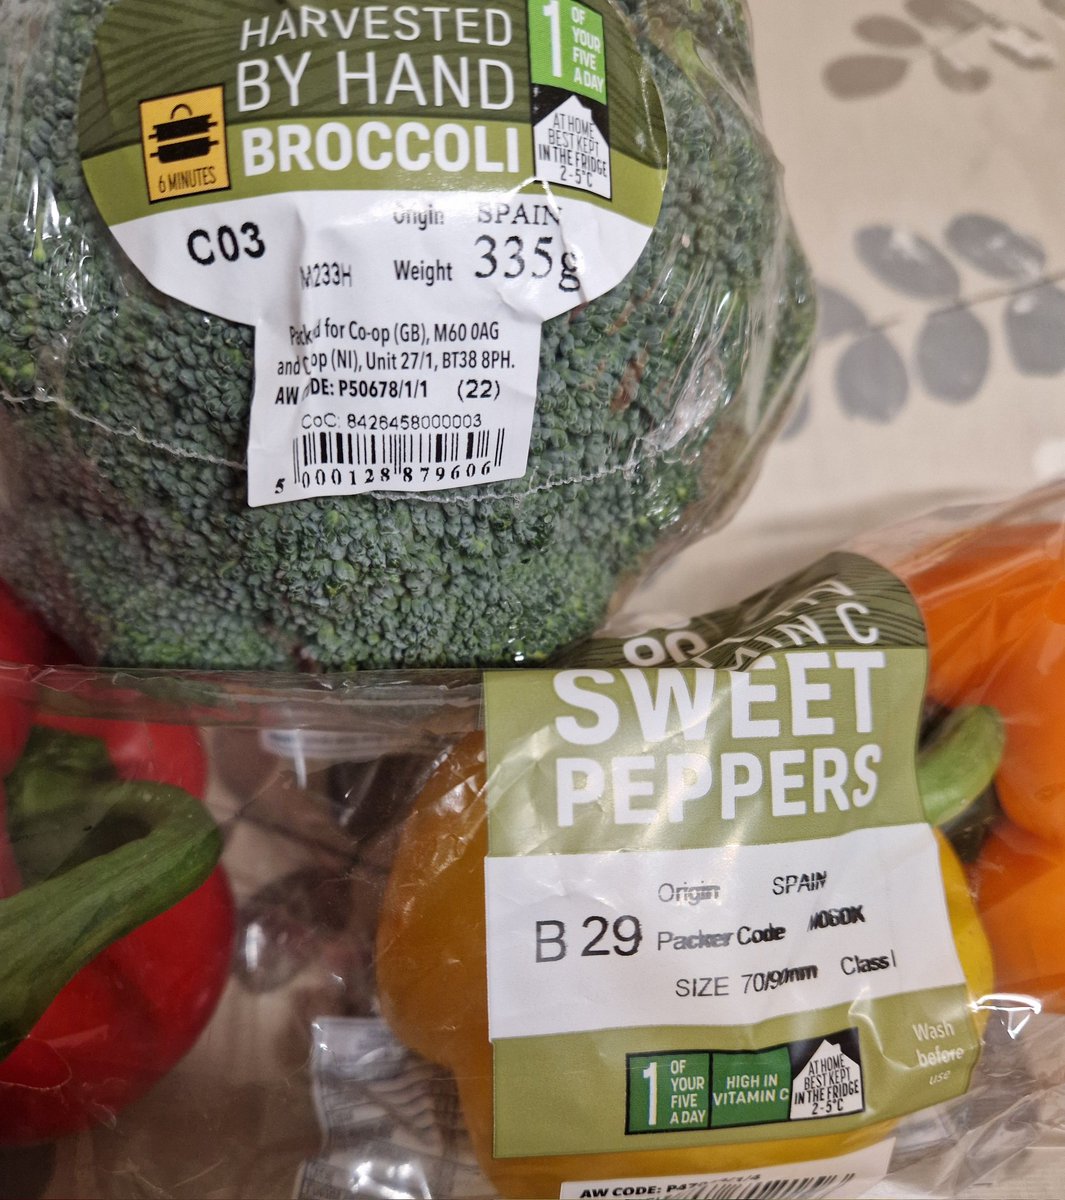 Ever bought veggies and been unable to find a date? Someone let me into a secret today. C03 = March 3rd (on the broccoli) B29 = Feb 29th (on the peppers) You're welcome😅